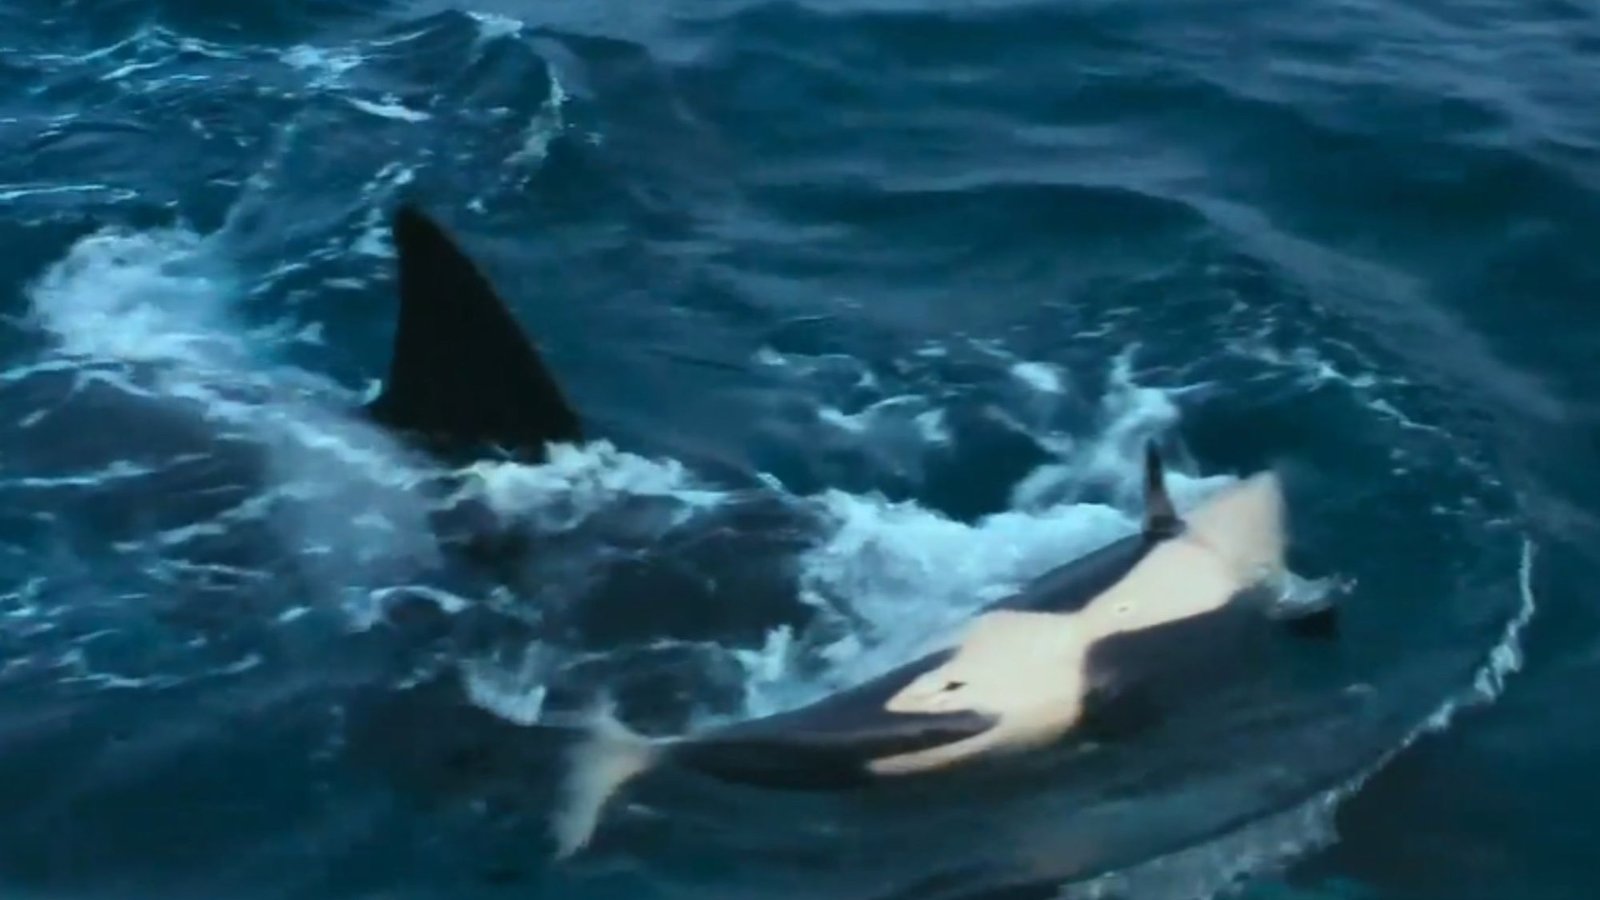 Horror moment mother son killer whales team up to drown rivals baby orca in rare attack NEVER filmed before